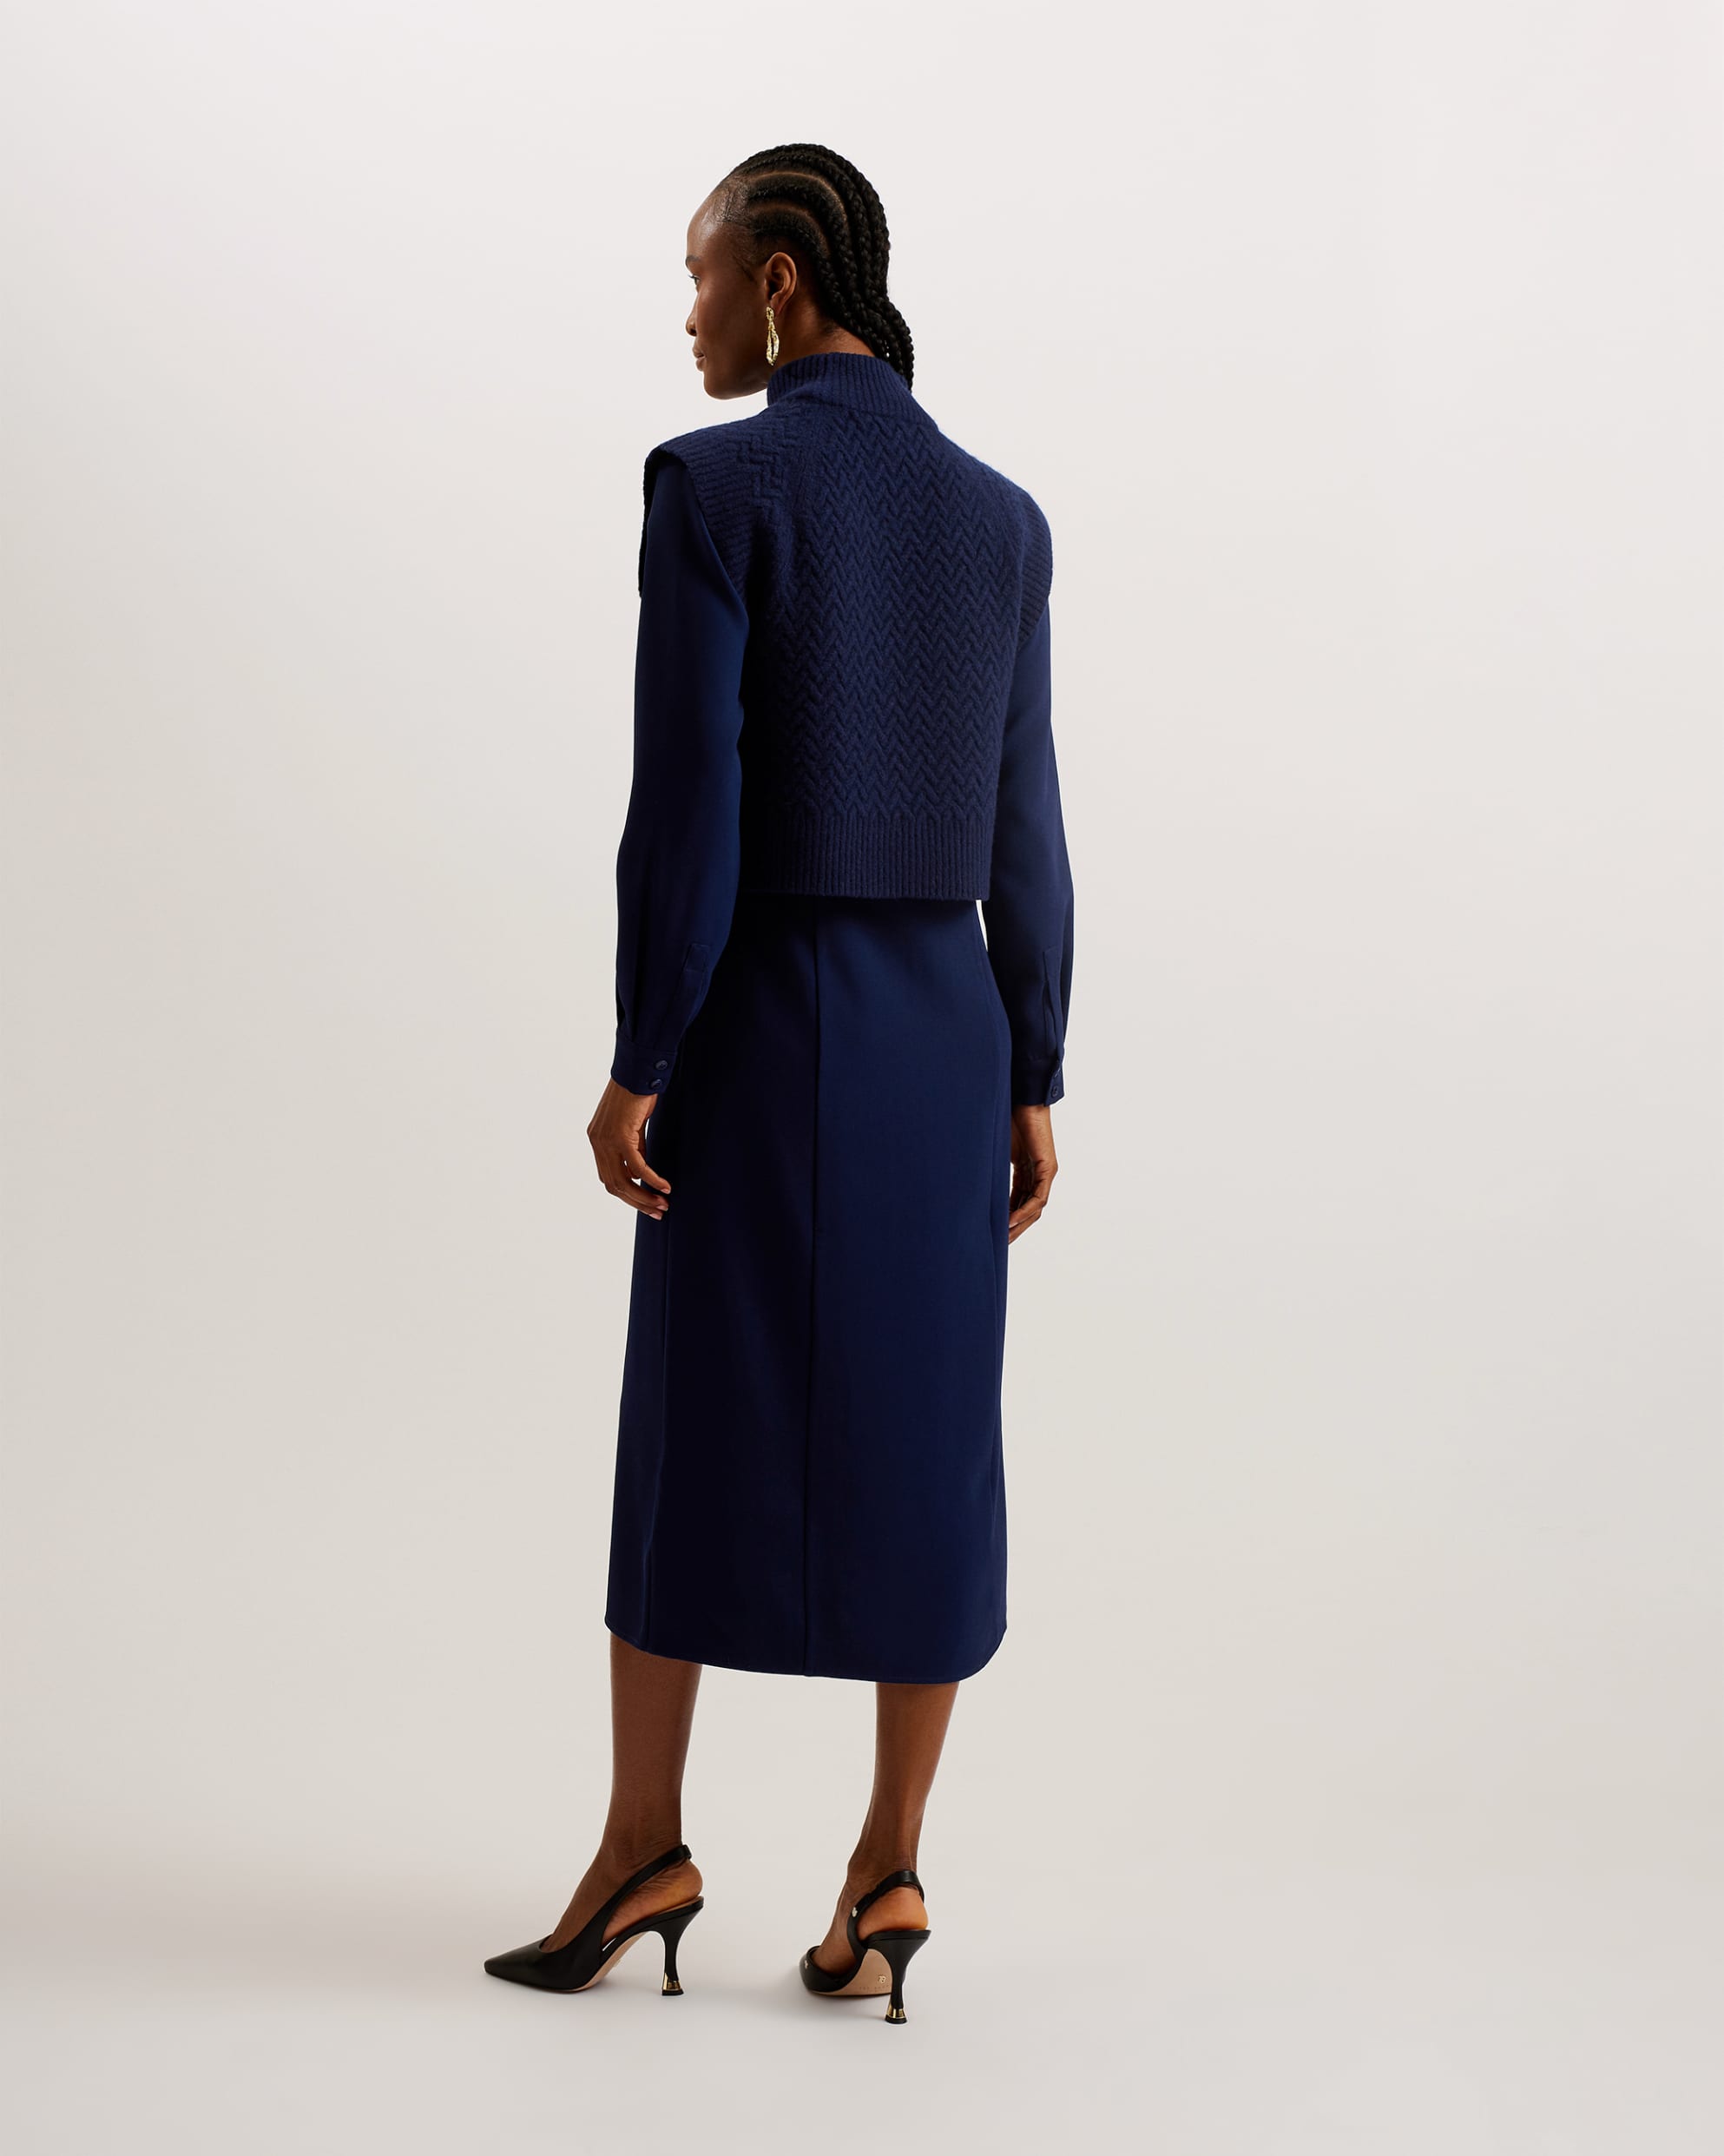 Elsiiey Shirt Dress With Sleeveless Knit Layer Navy